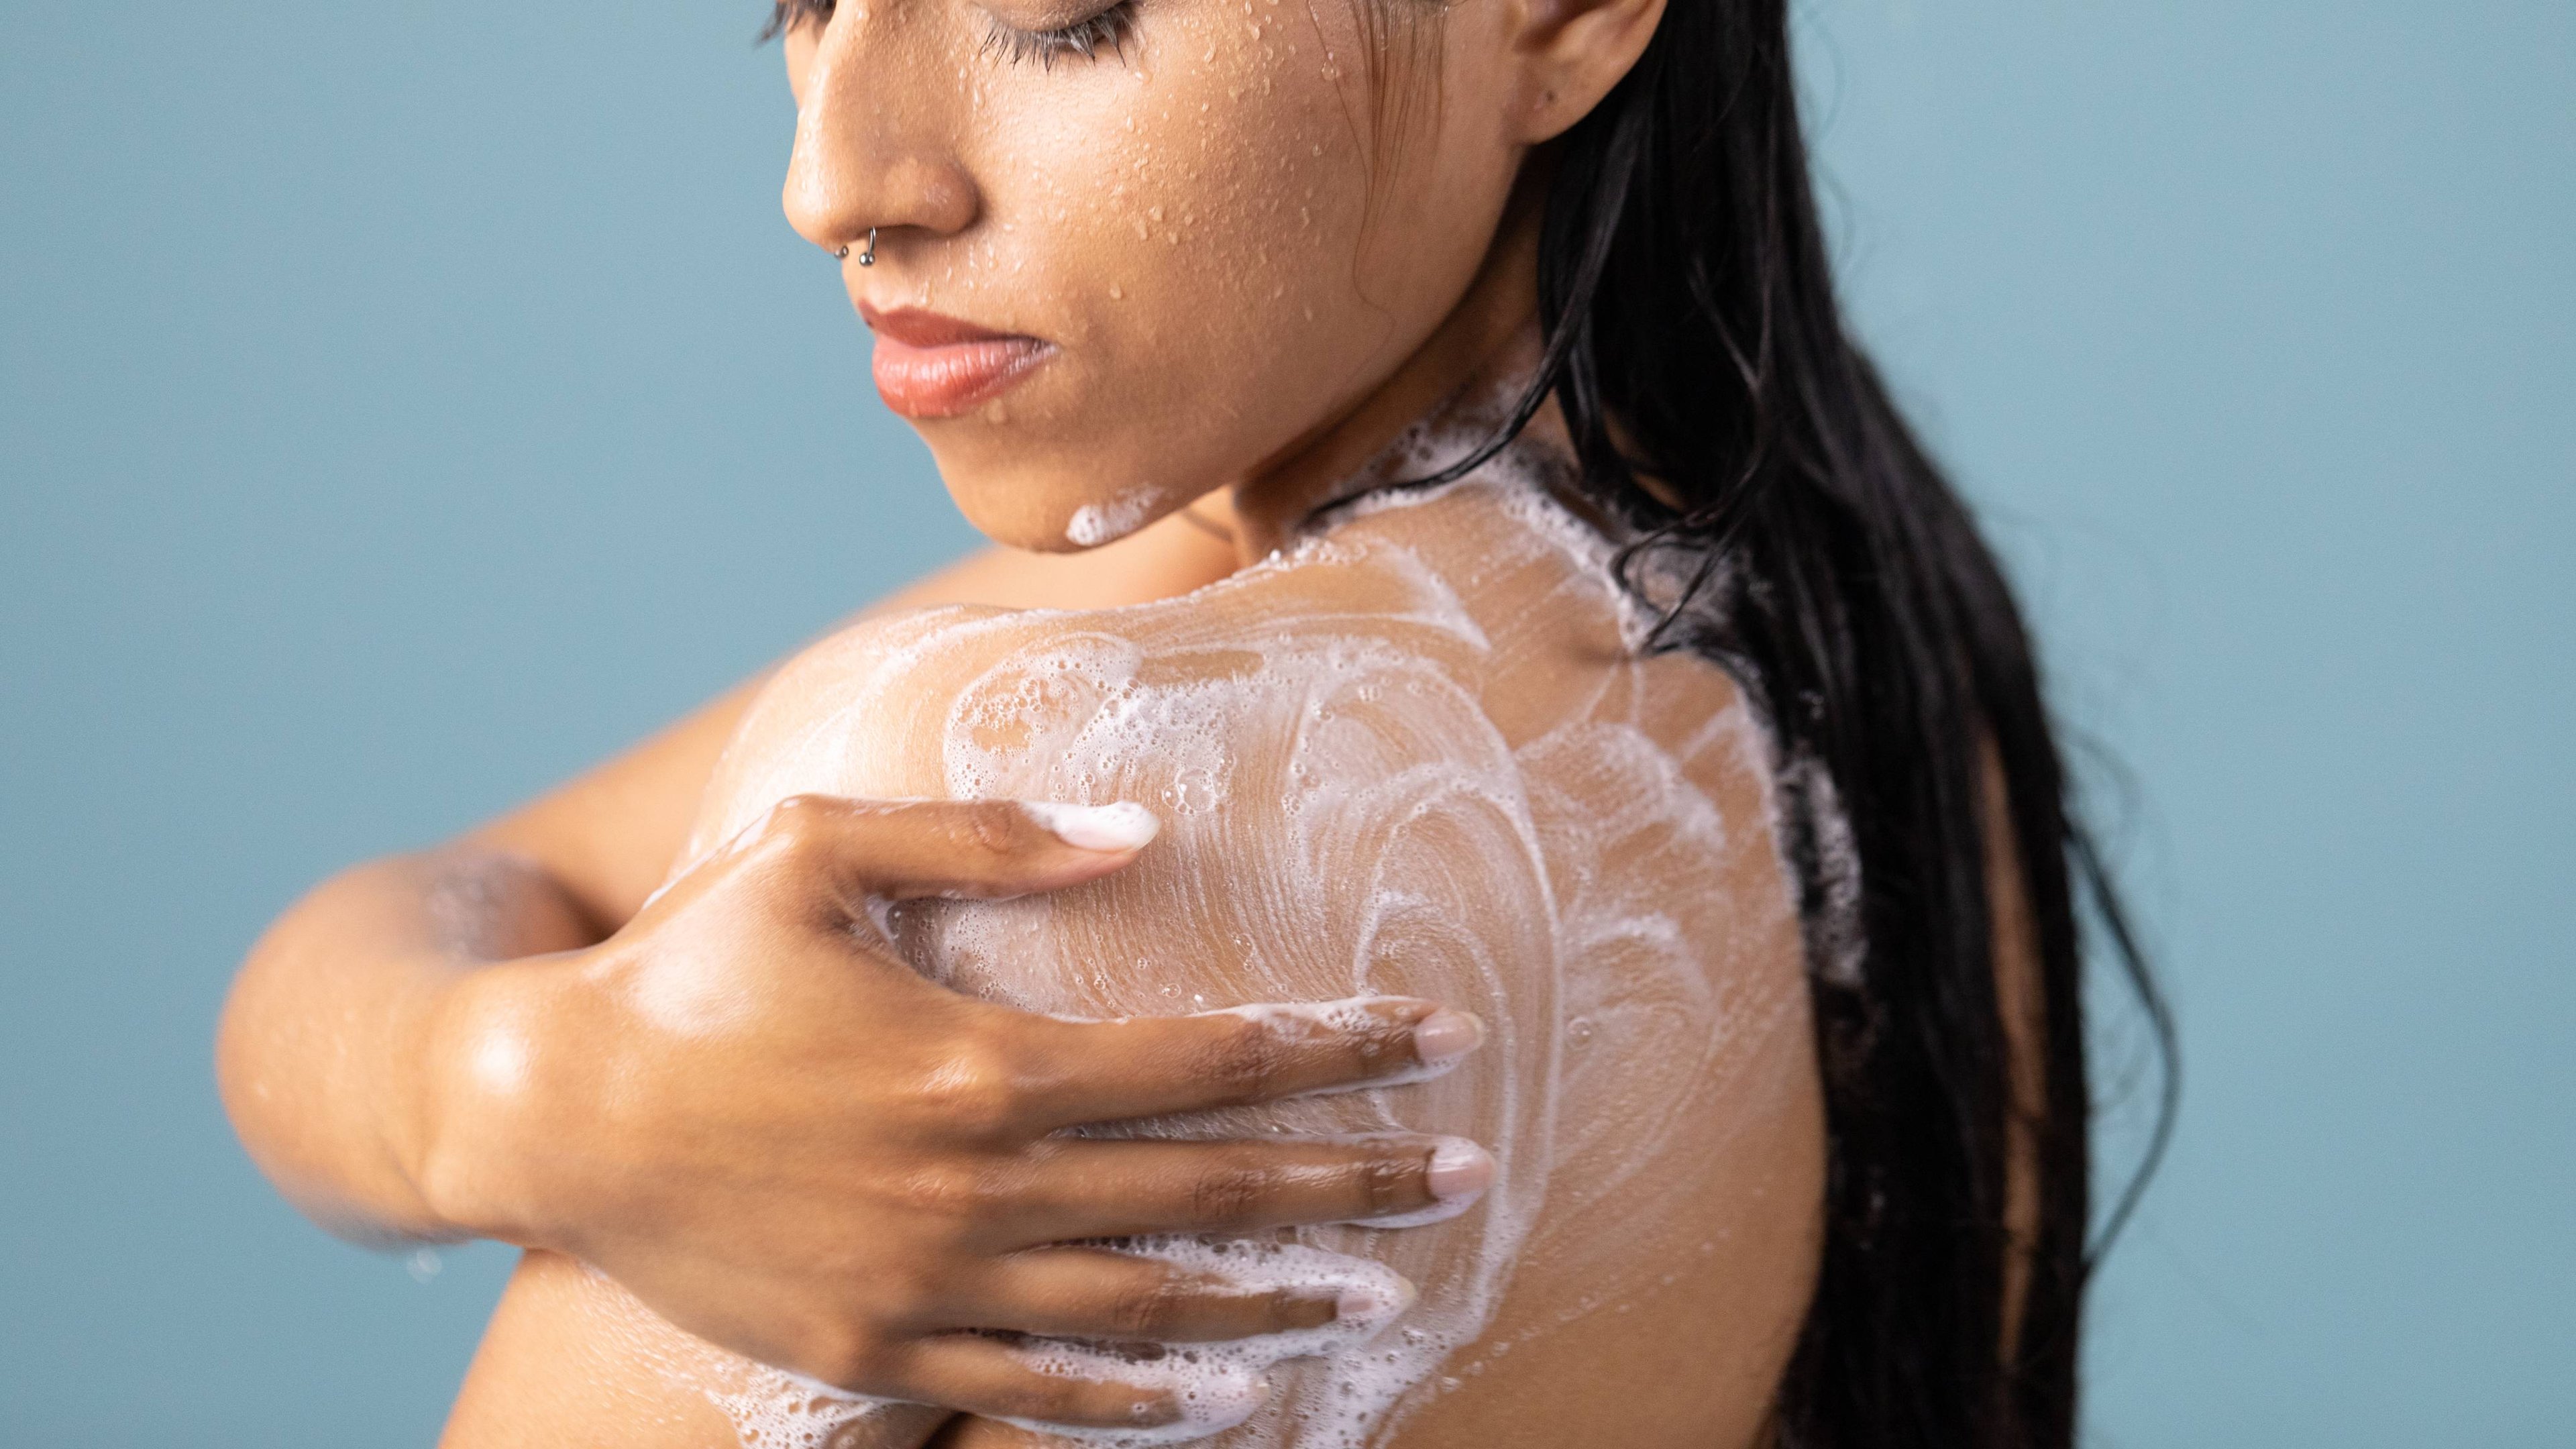 The model is on a pale blue background stood under the shower lathering up their shoulder with shower gel.